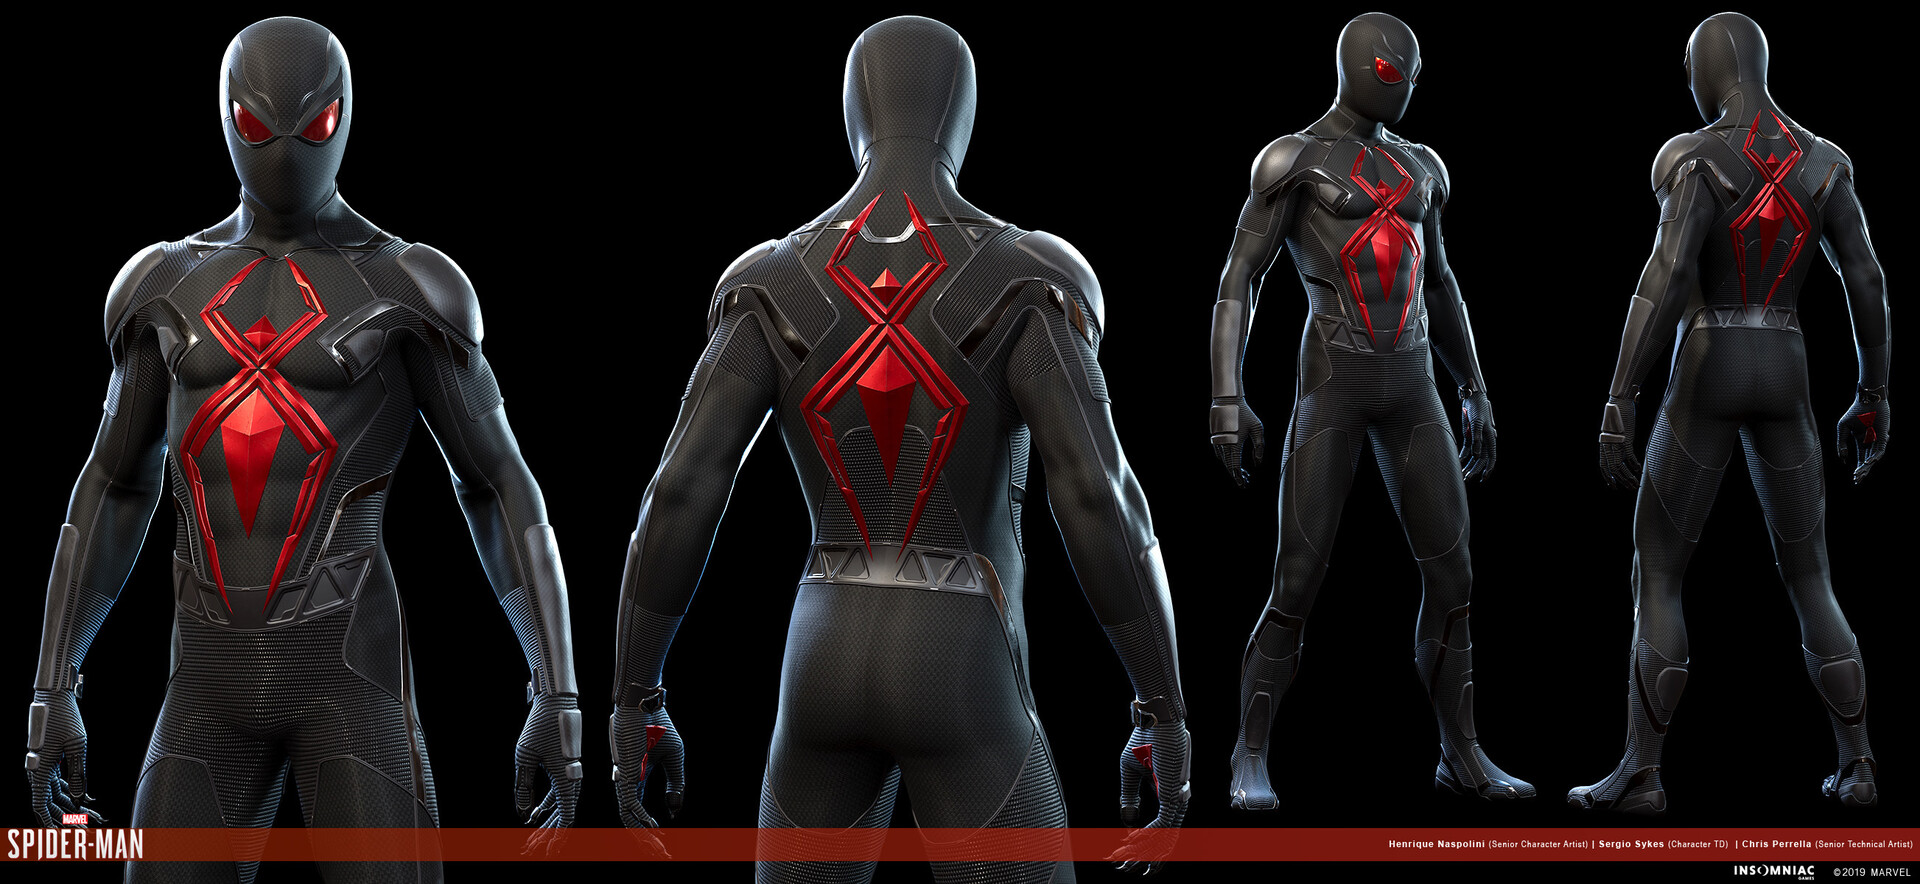 SPIDER-MAN PS4 Concept Art Features Spidey's Alternate Suits And The ...